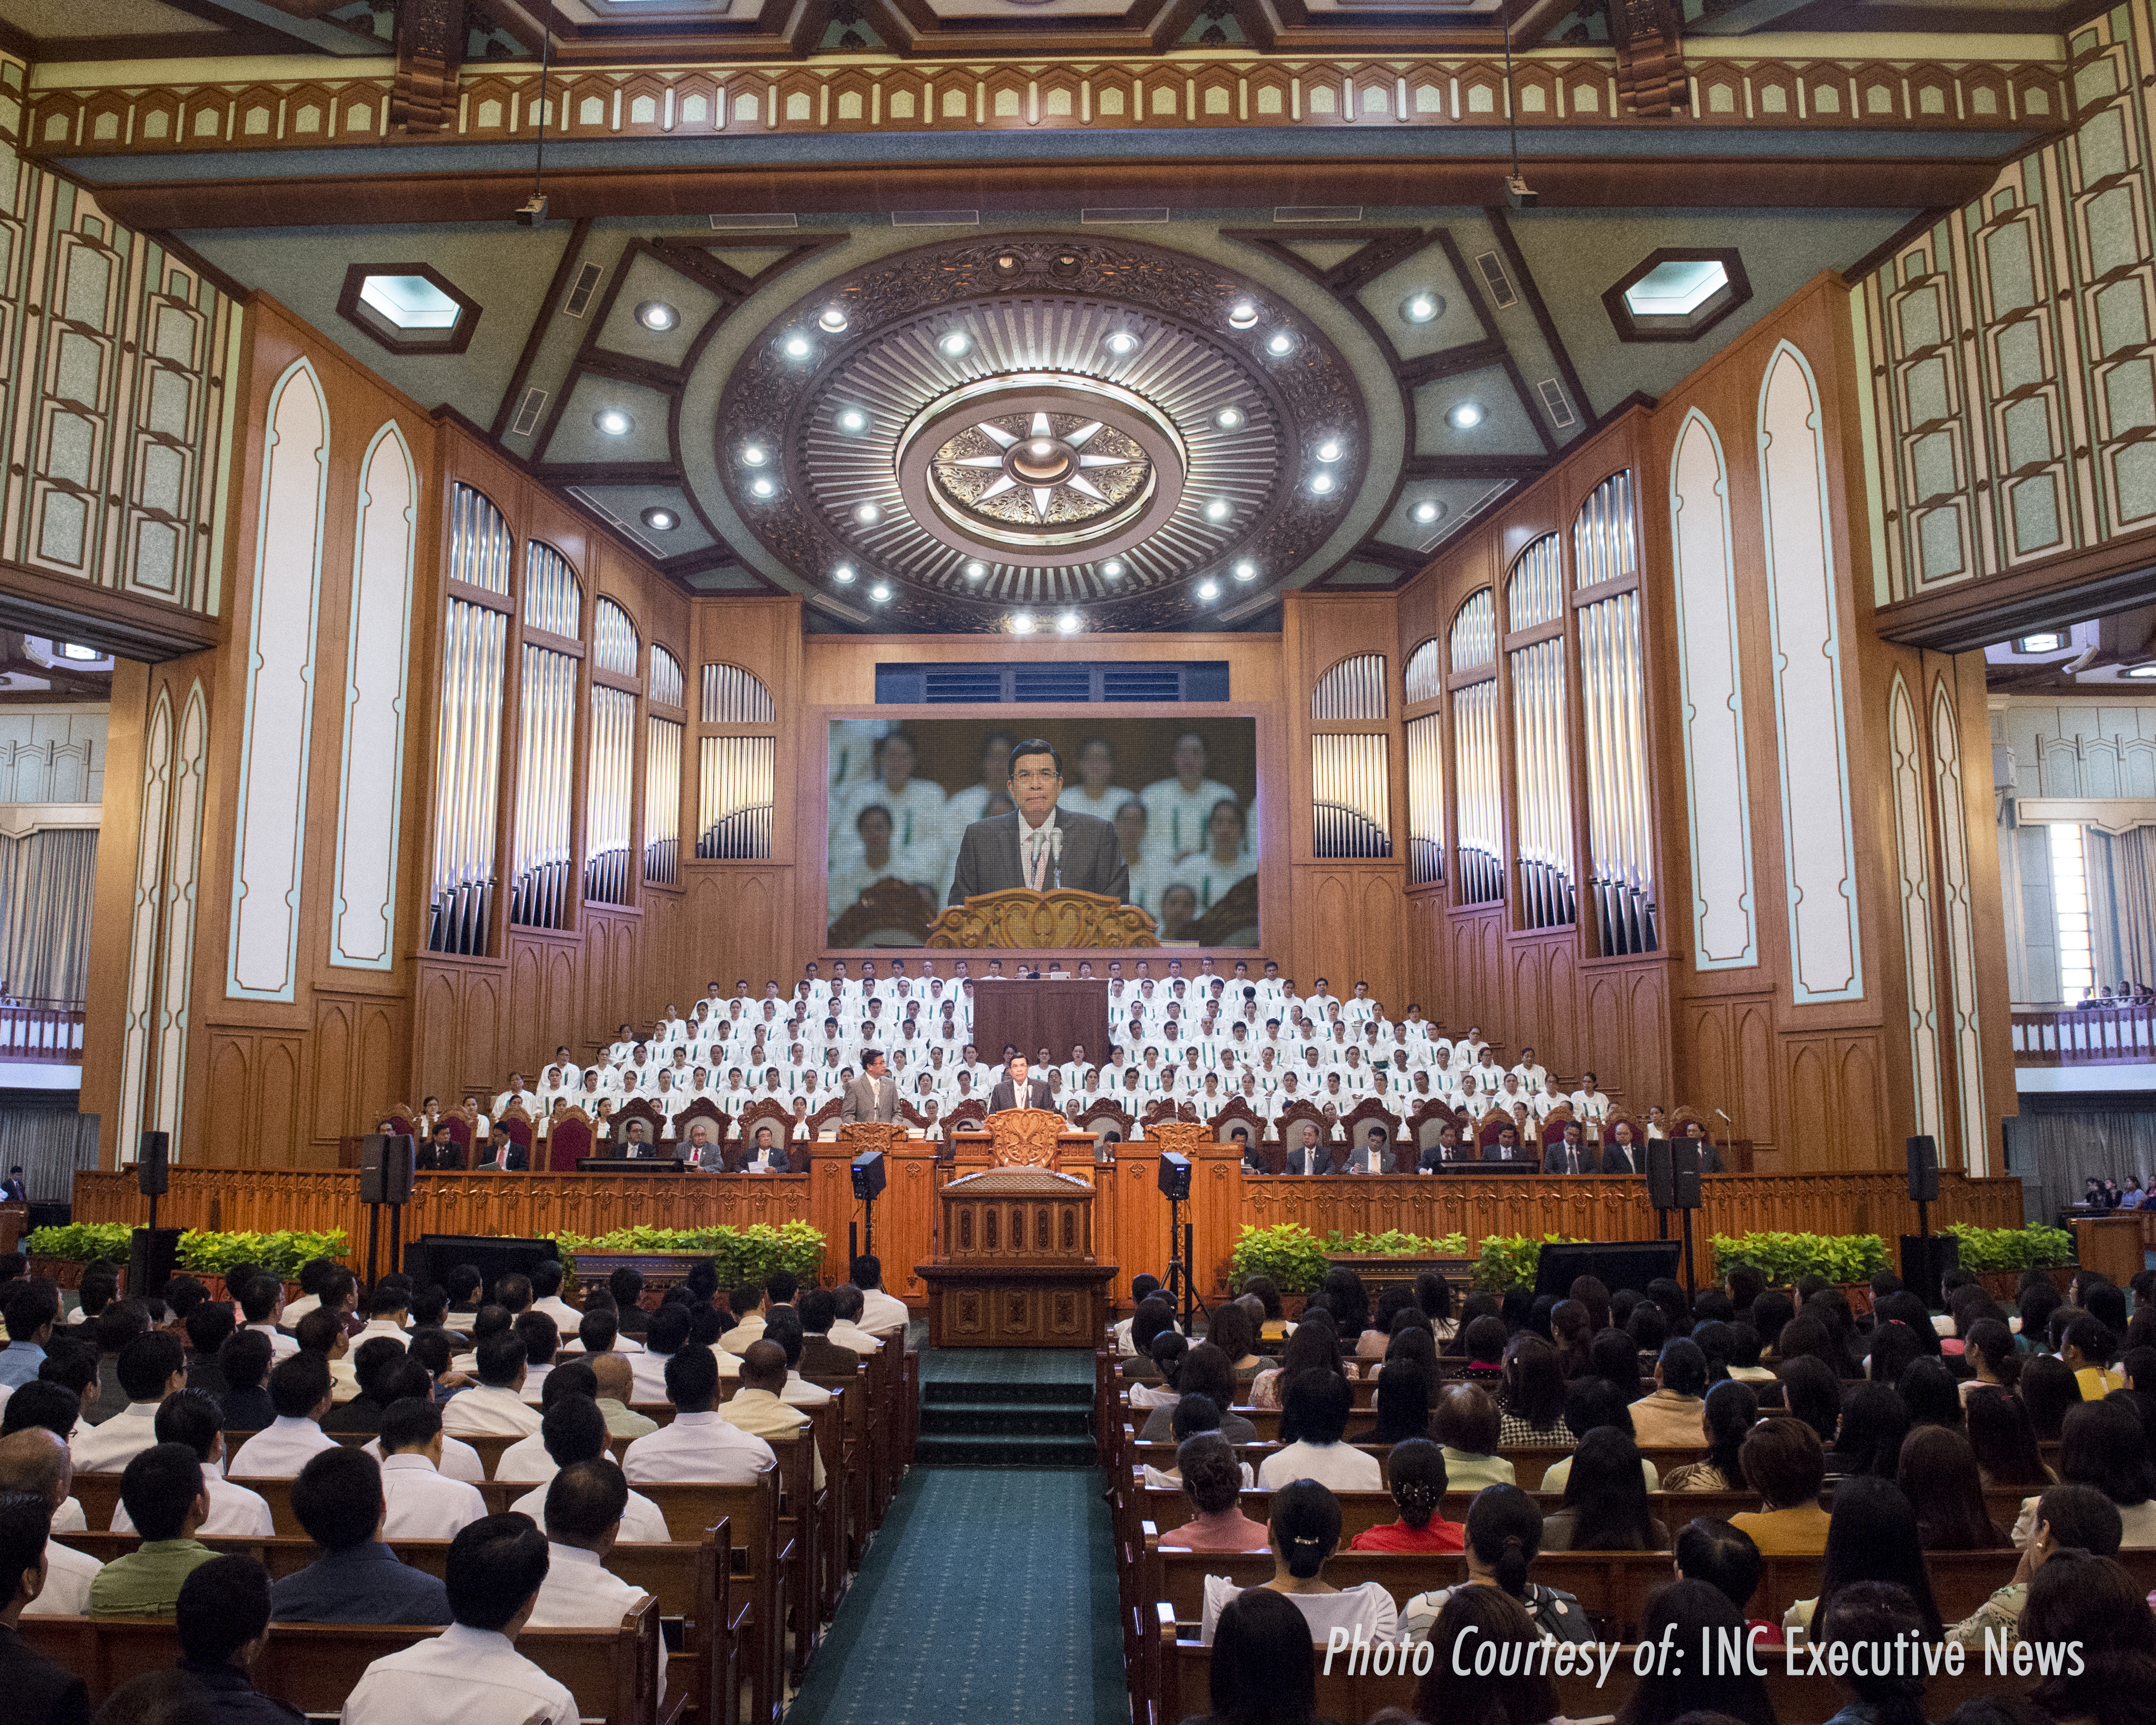 Glorious hymnsinging to God in INC's Central Temple